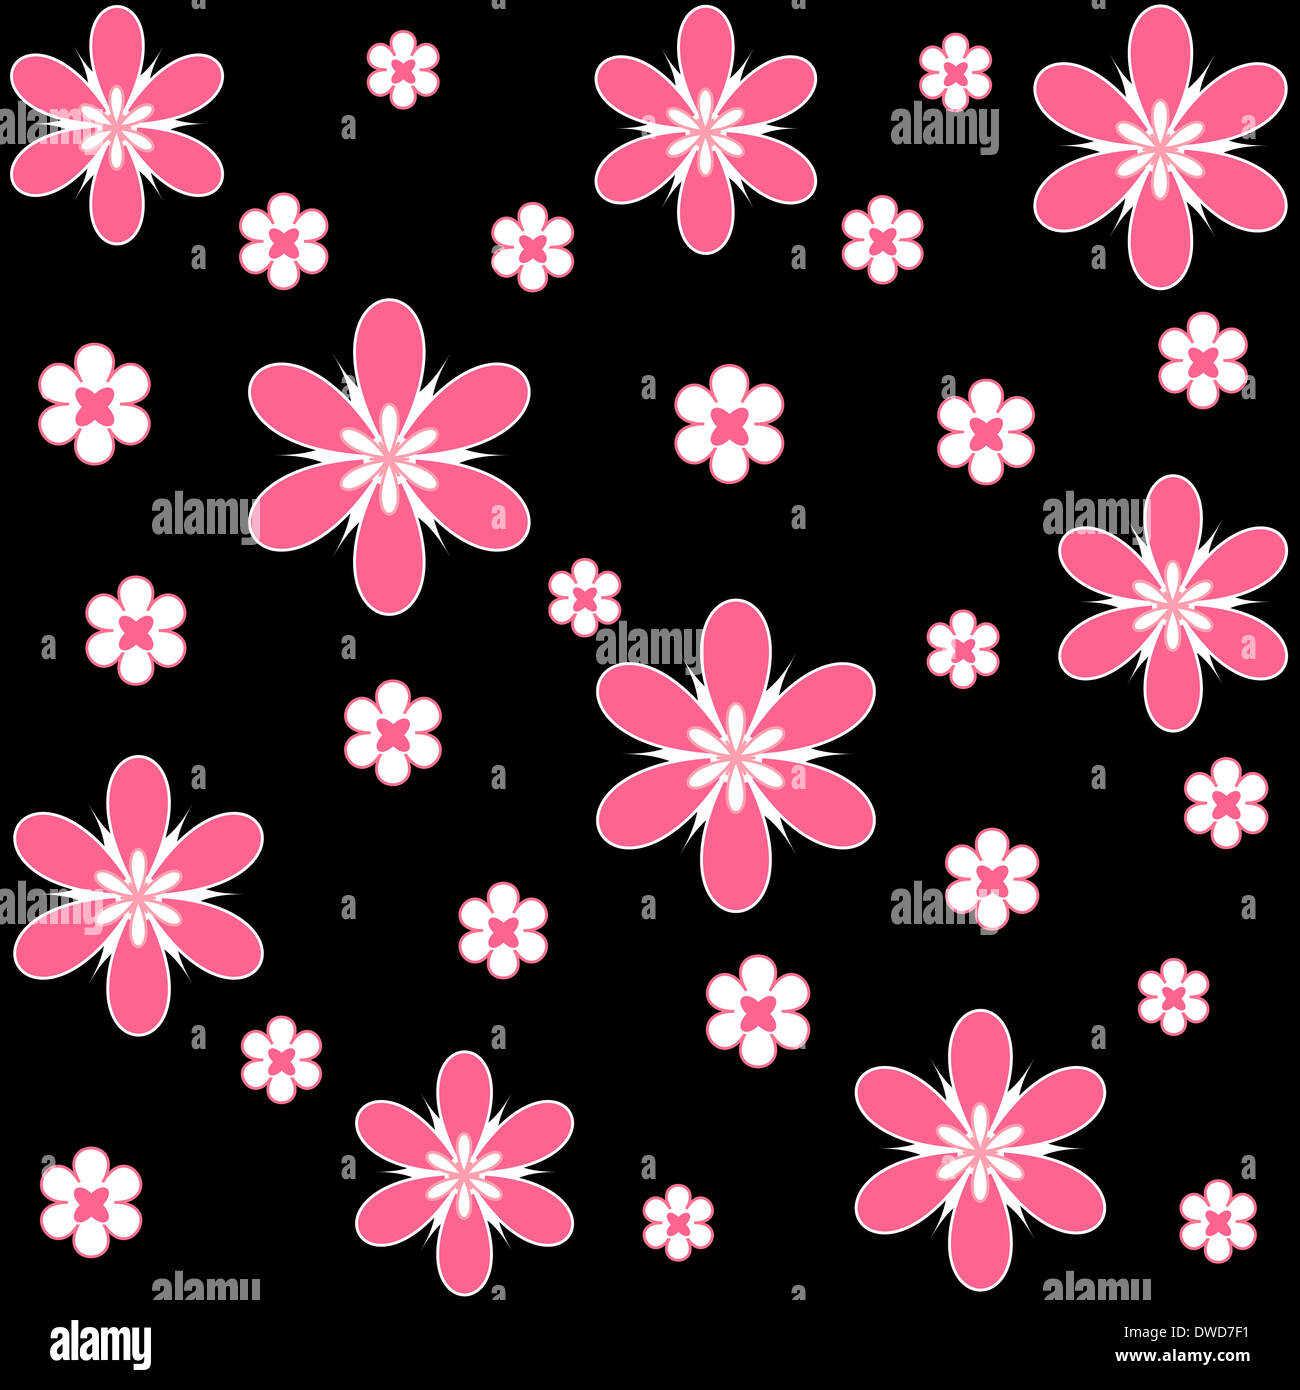 Colorful seamless floral pattern Stock Photo